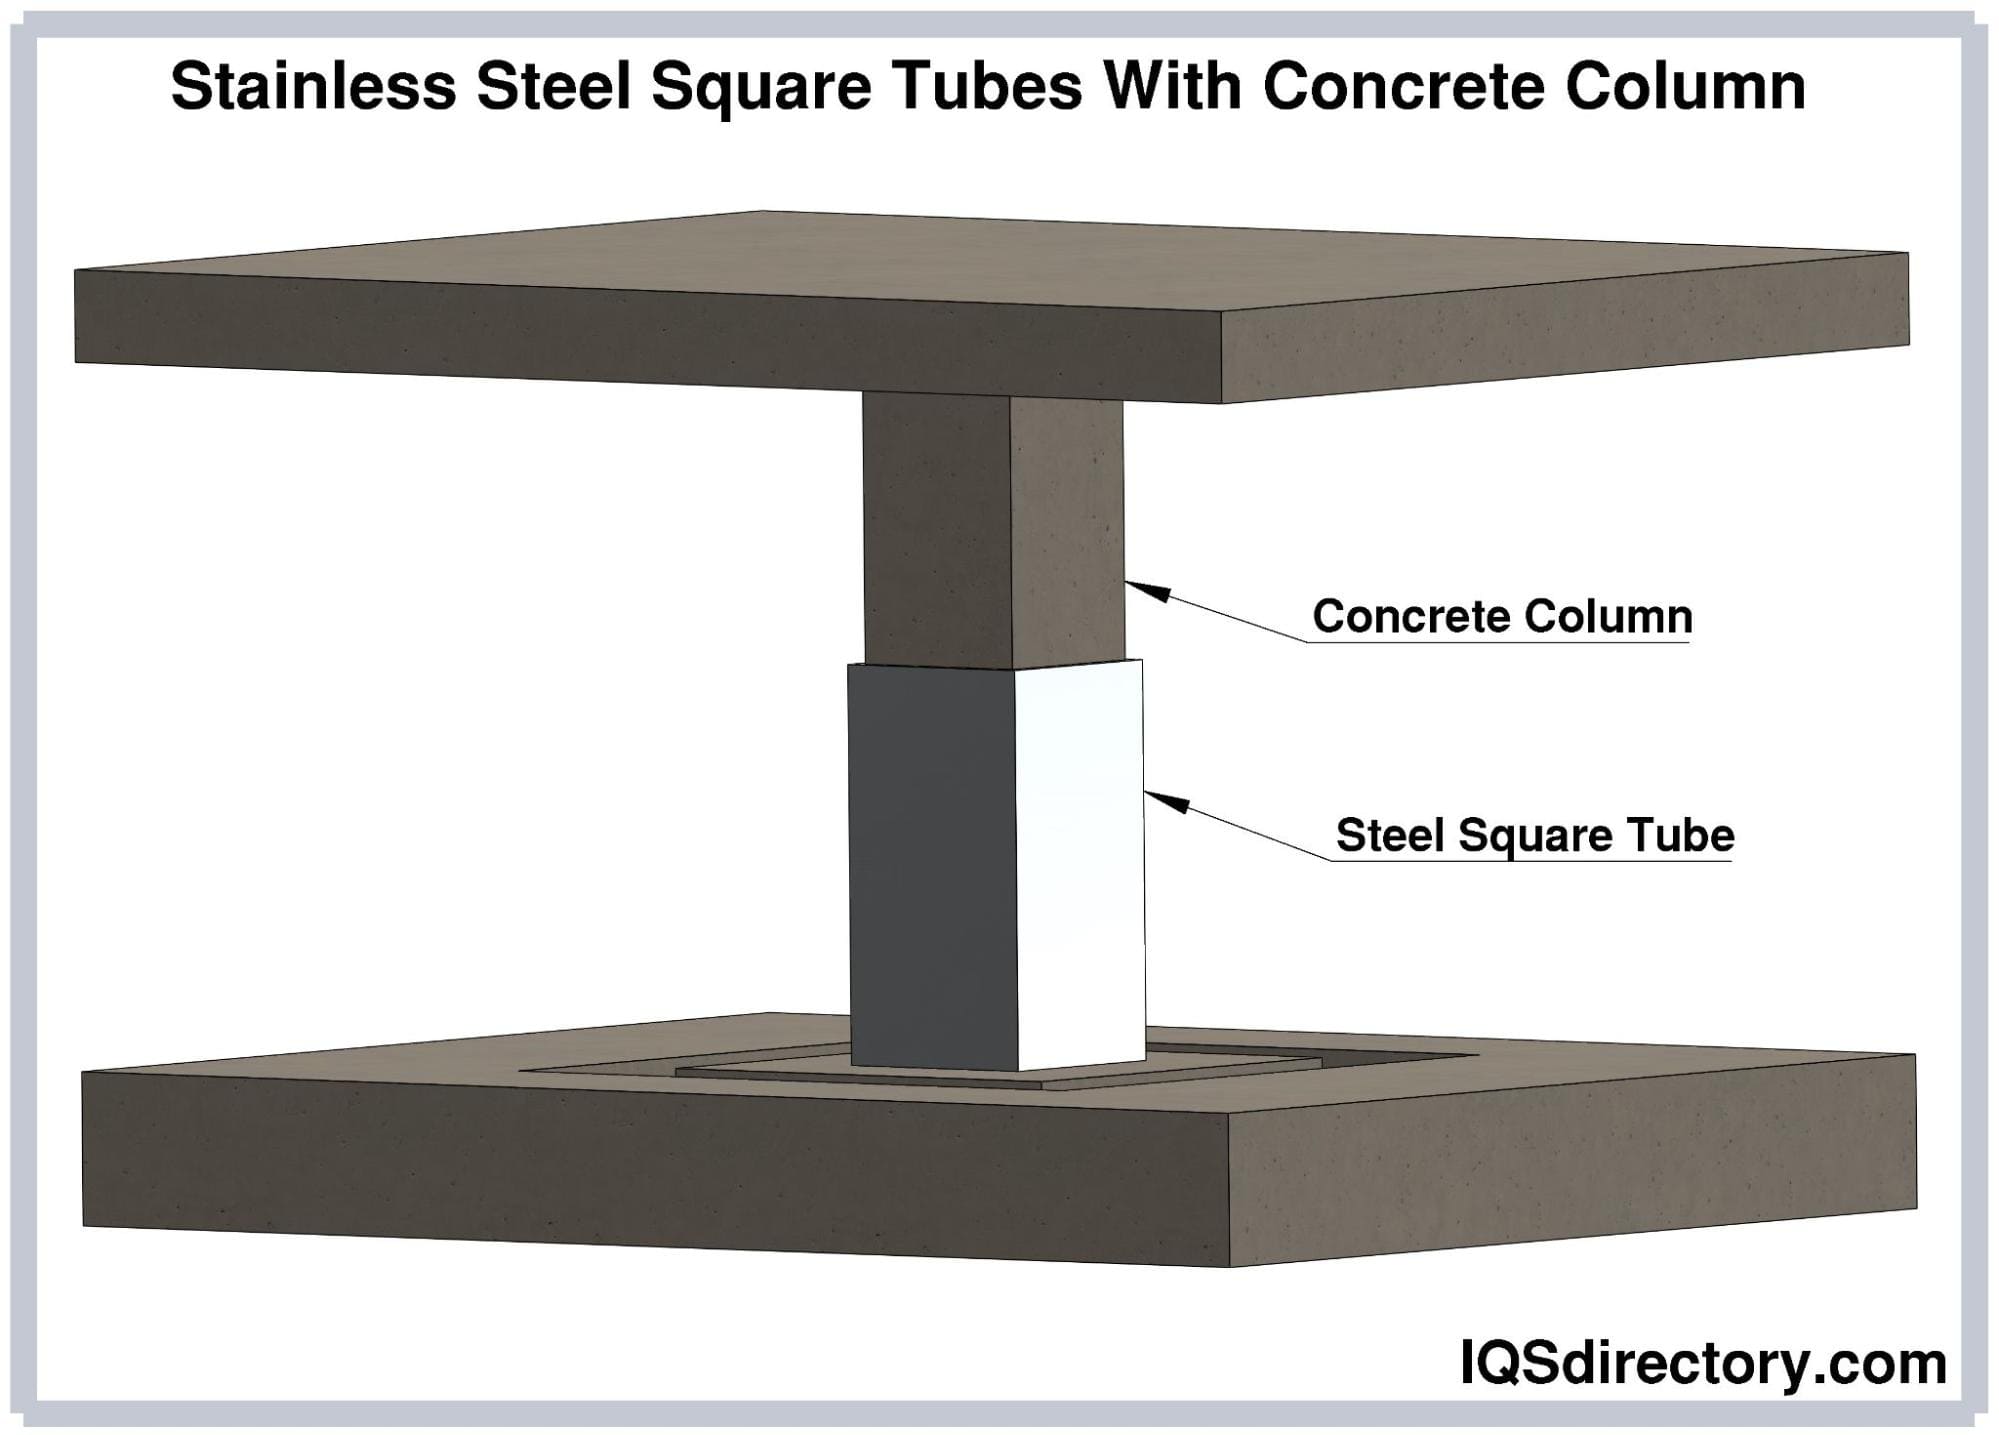 Stainless Steel Square Tubes With Concrete Column